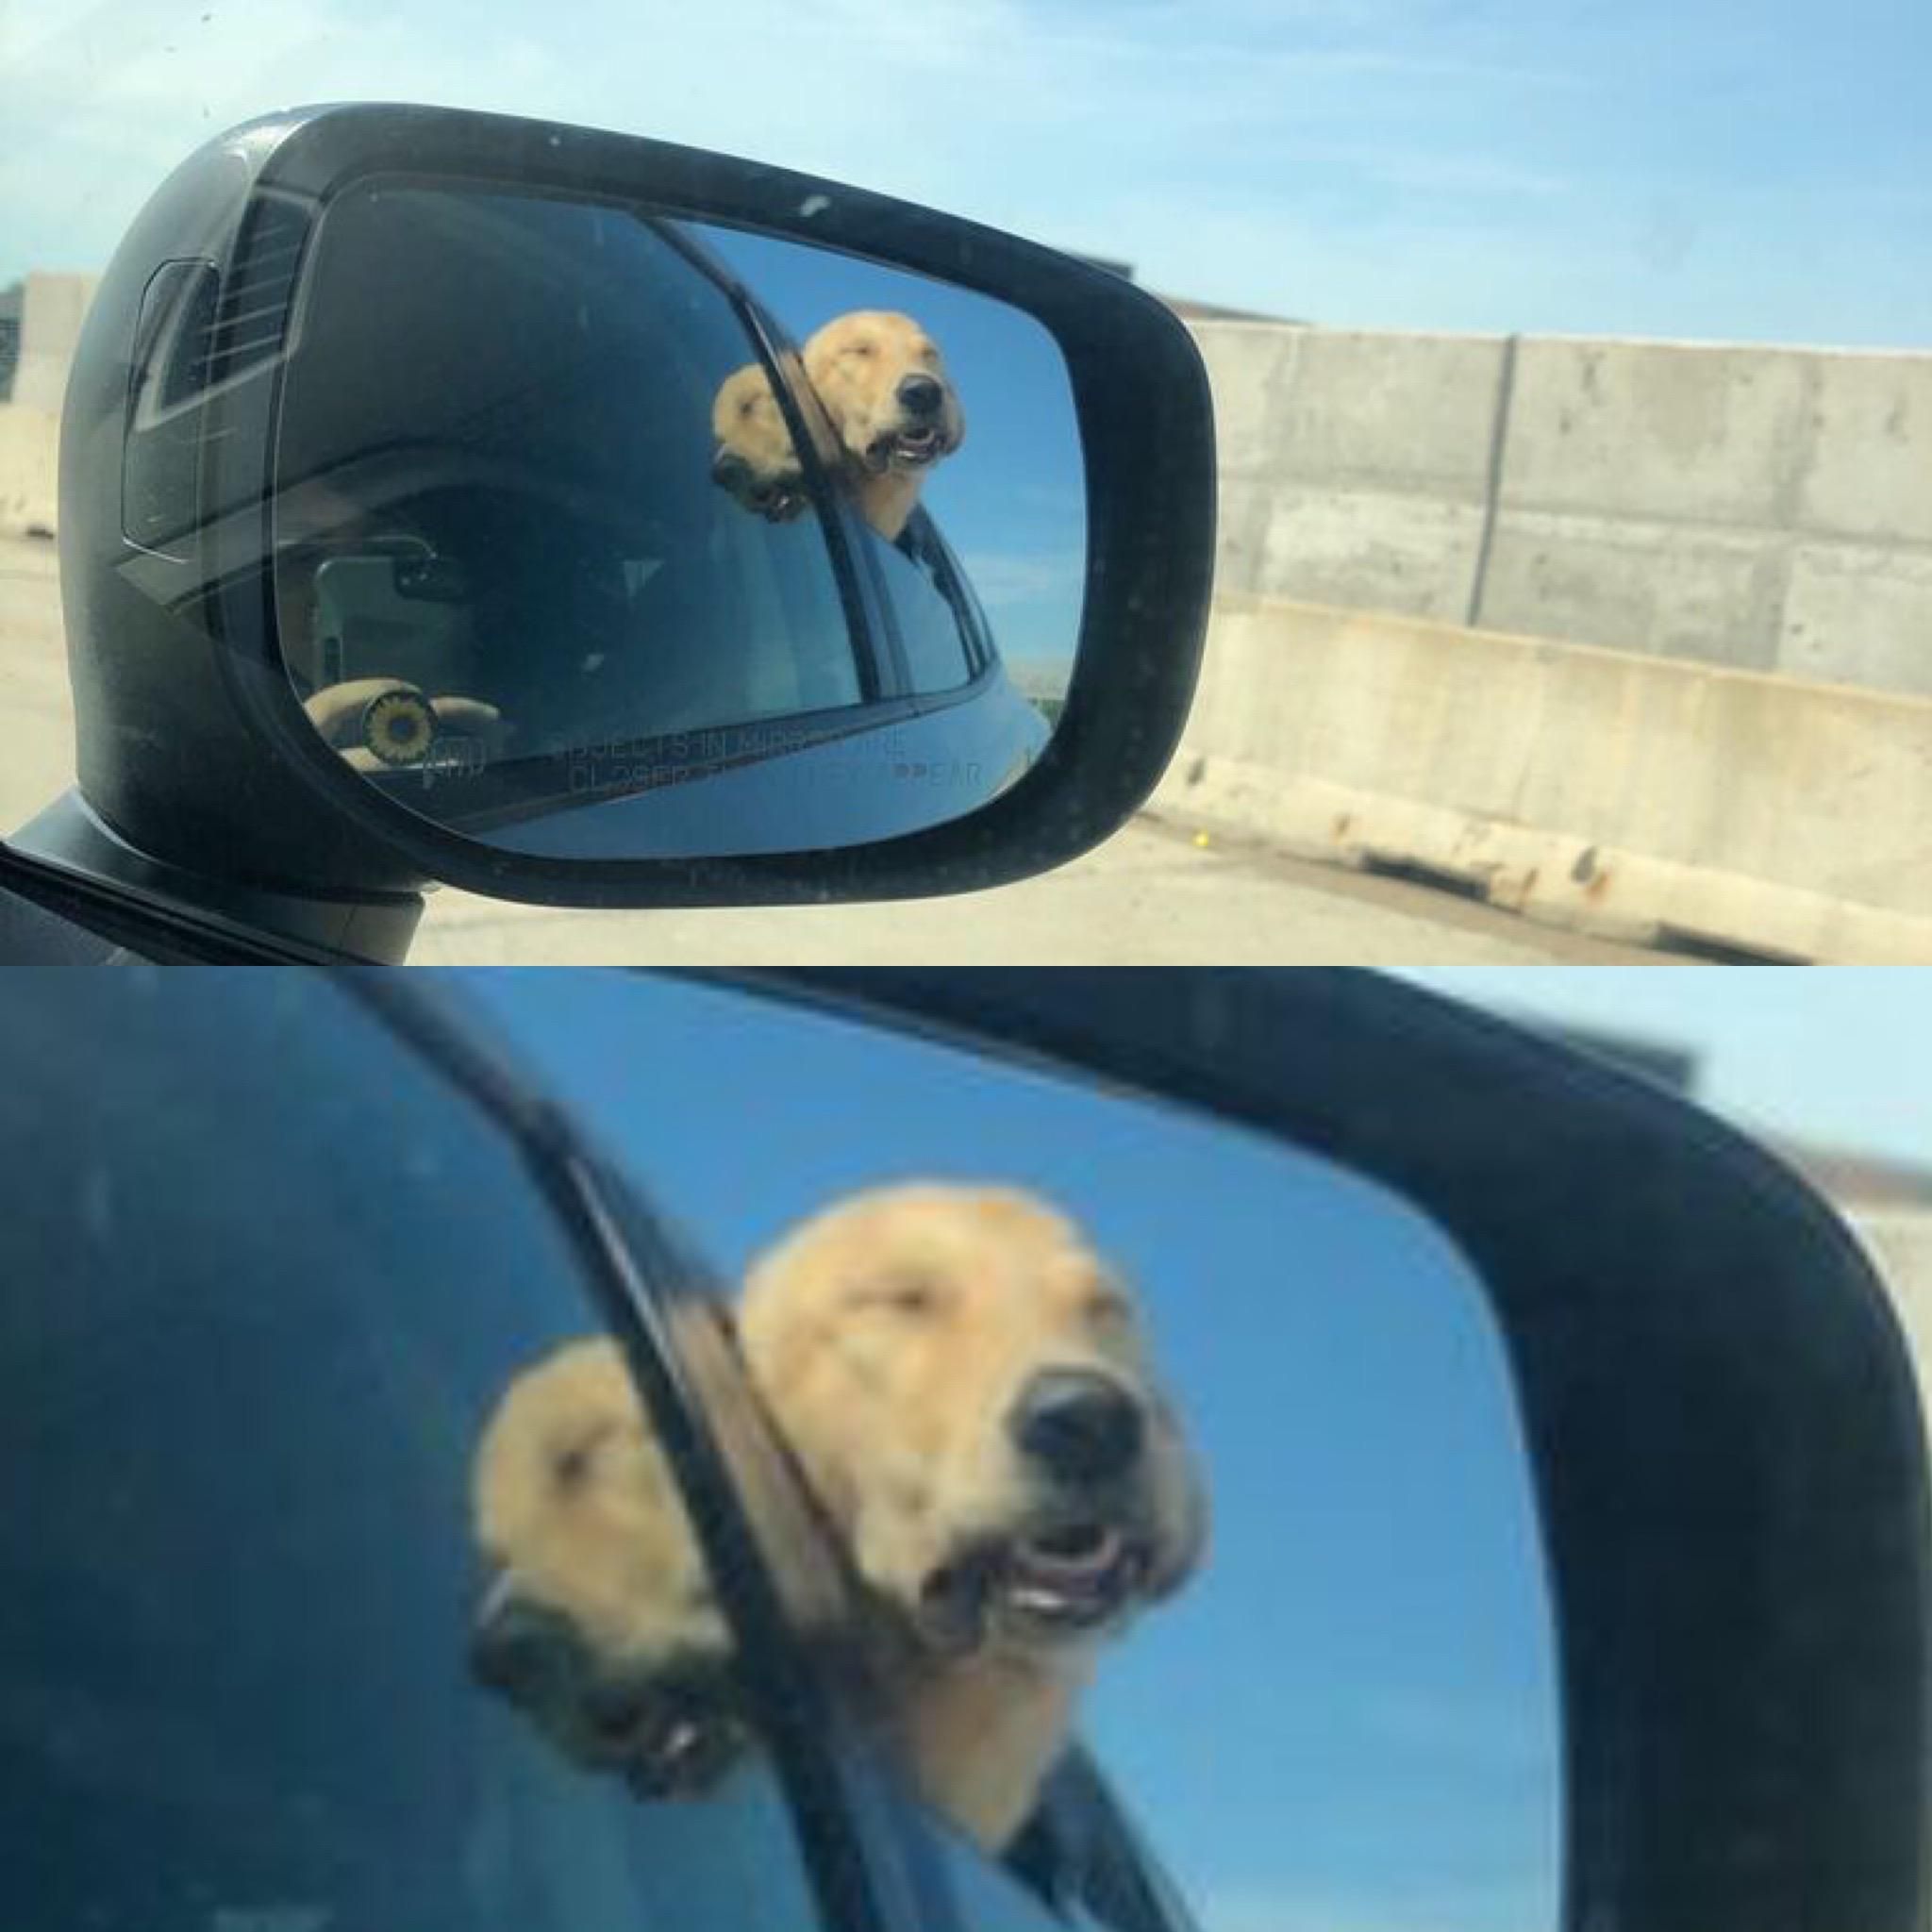 Our dog is spiritually reborn whenever she goes on a car ride